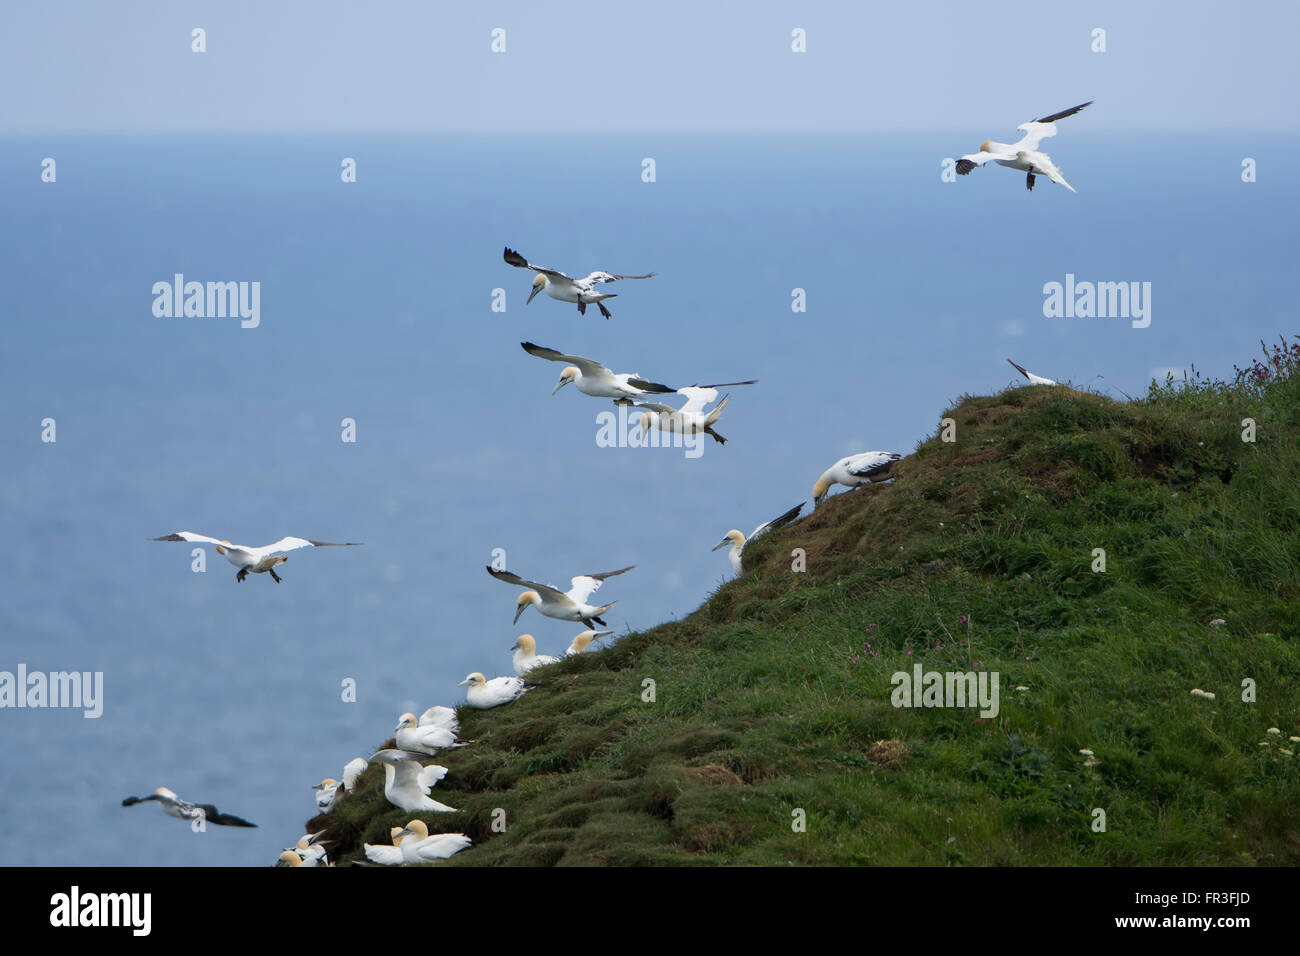 Northern Gannets (Morus bassanus) ride the wind at the cliff edge, Bempton Cliffs, East Yorkshire, UK Stock Photo